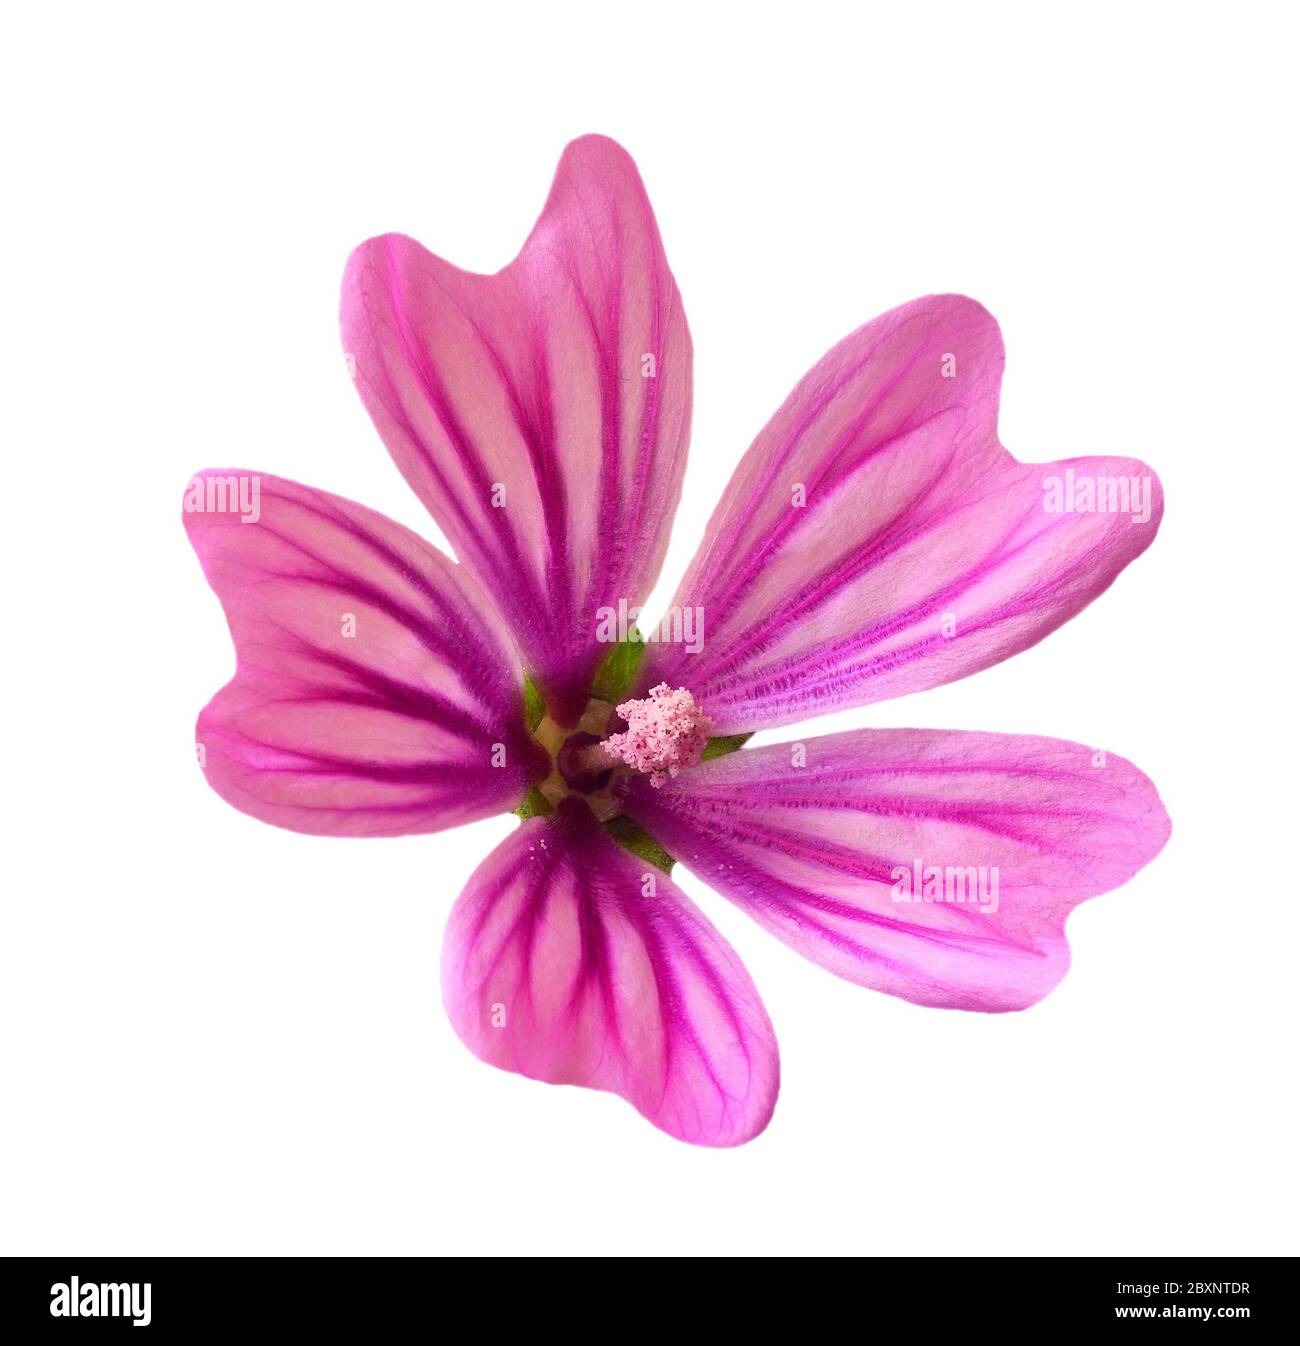 Common Mallow flower - malva sylvestris. Medicinal plant. Back lit, high key with selective shallow focus for artistic effect. Isolated on white. Stock Photo